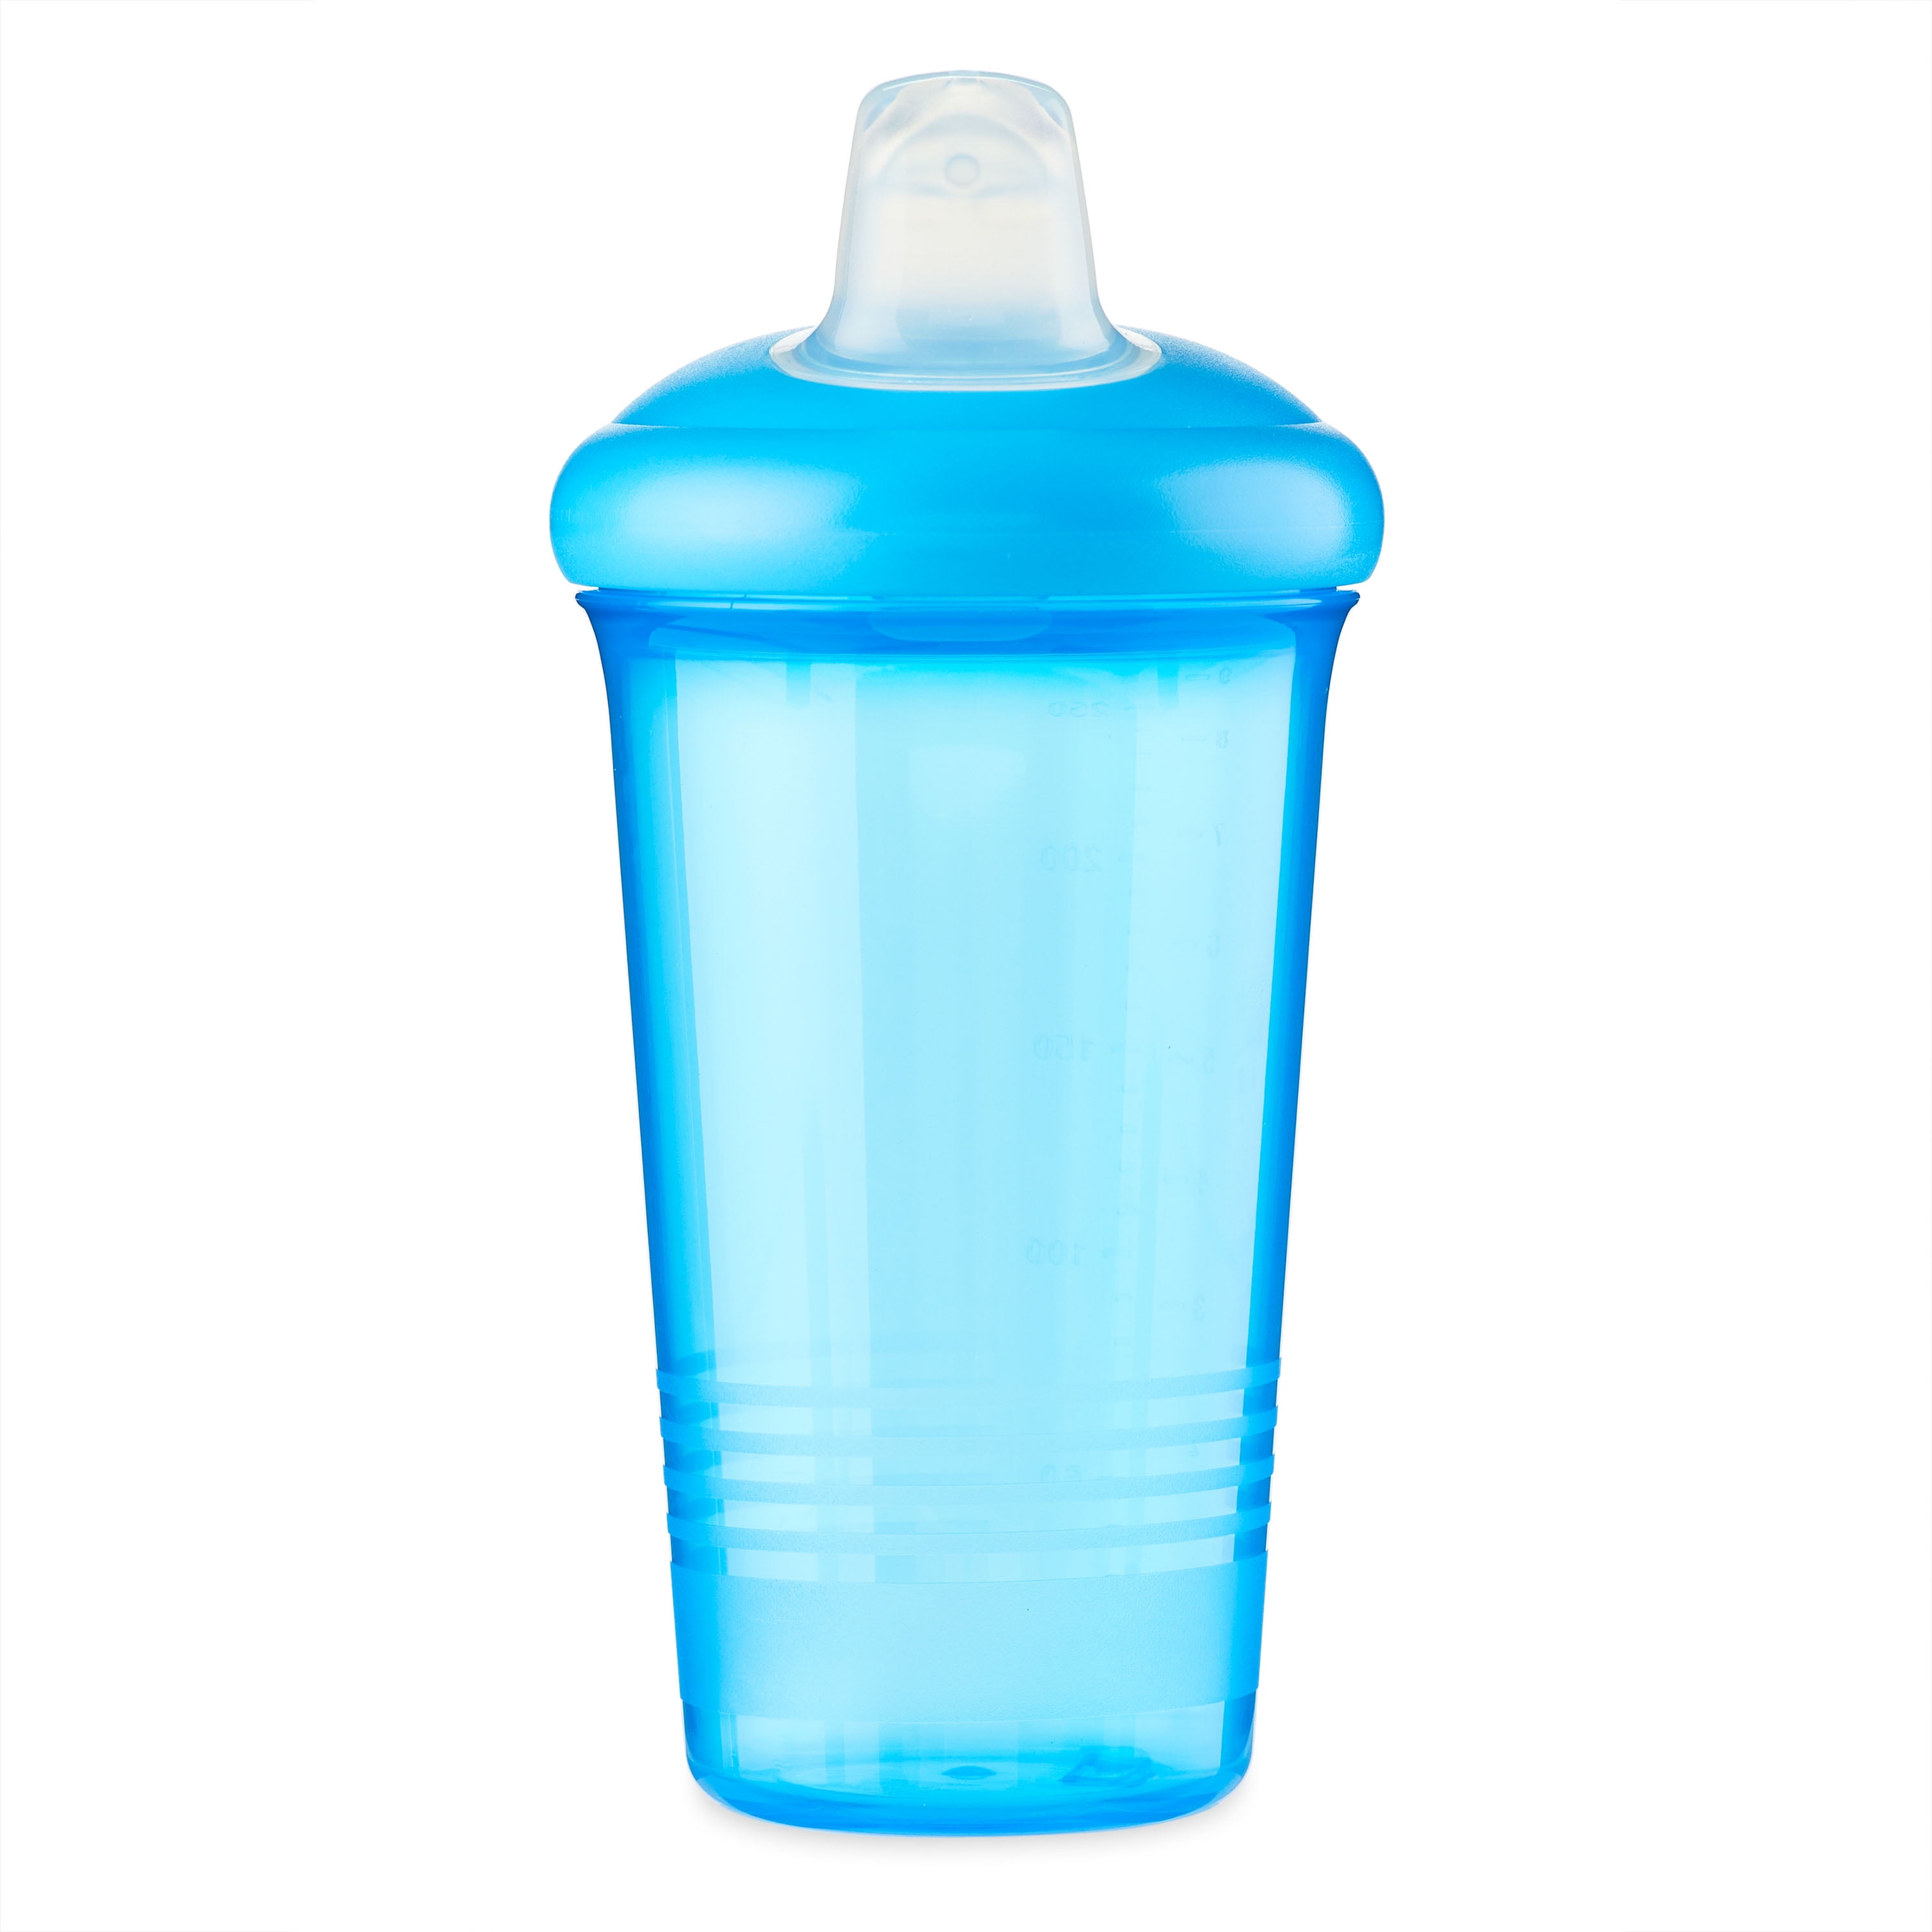 Sippy cups versus straw cups: Which one to choose? - Newborn Baby